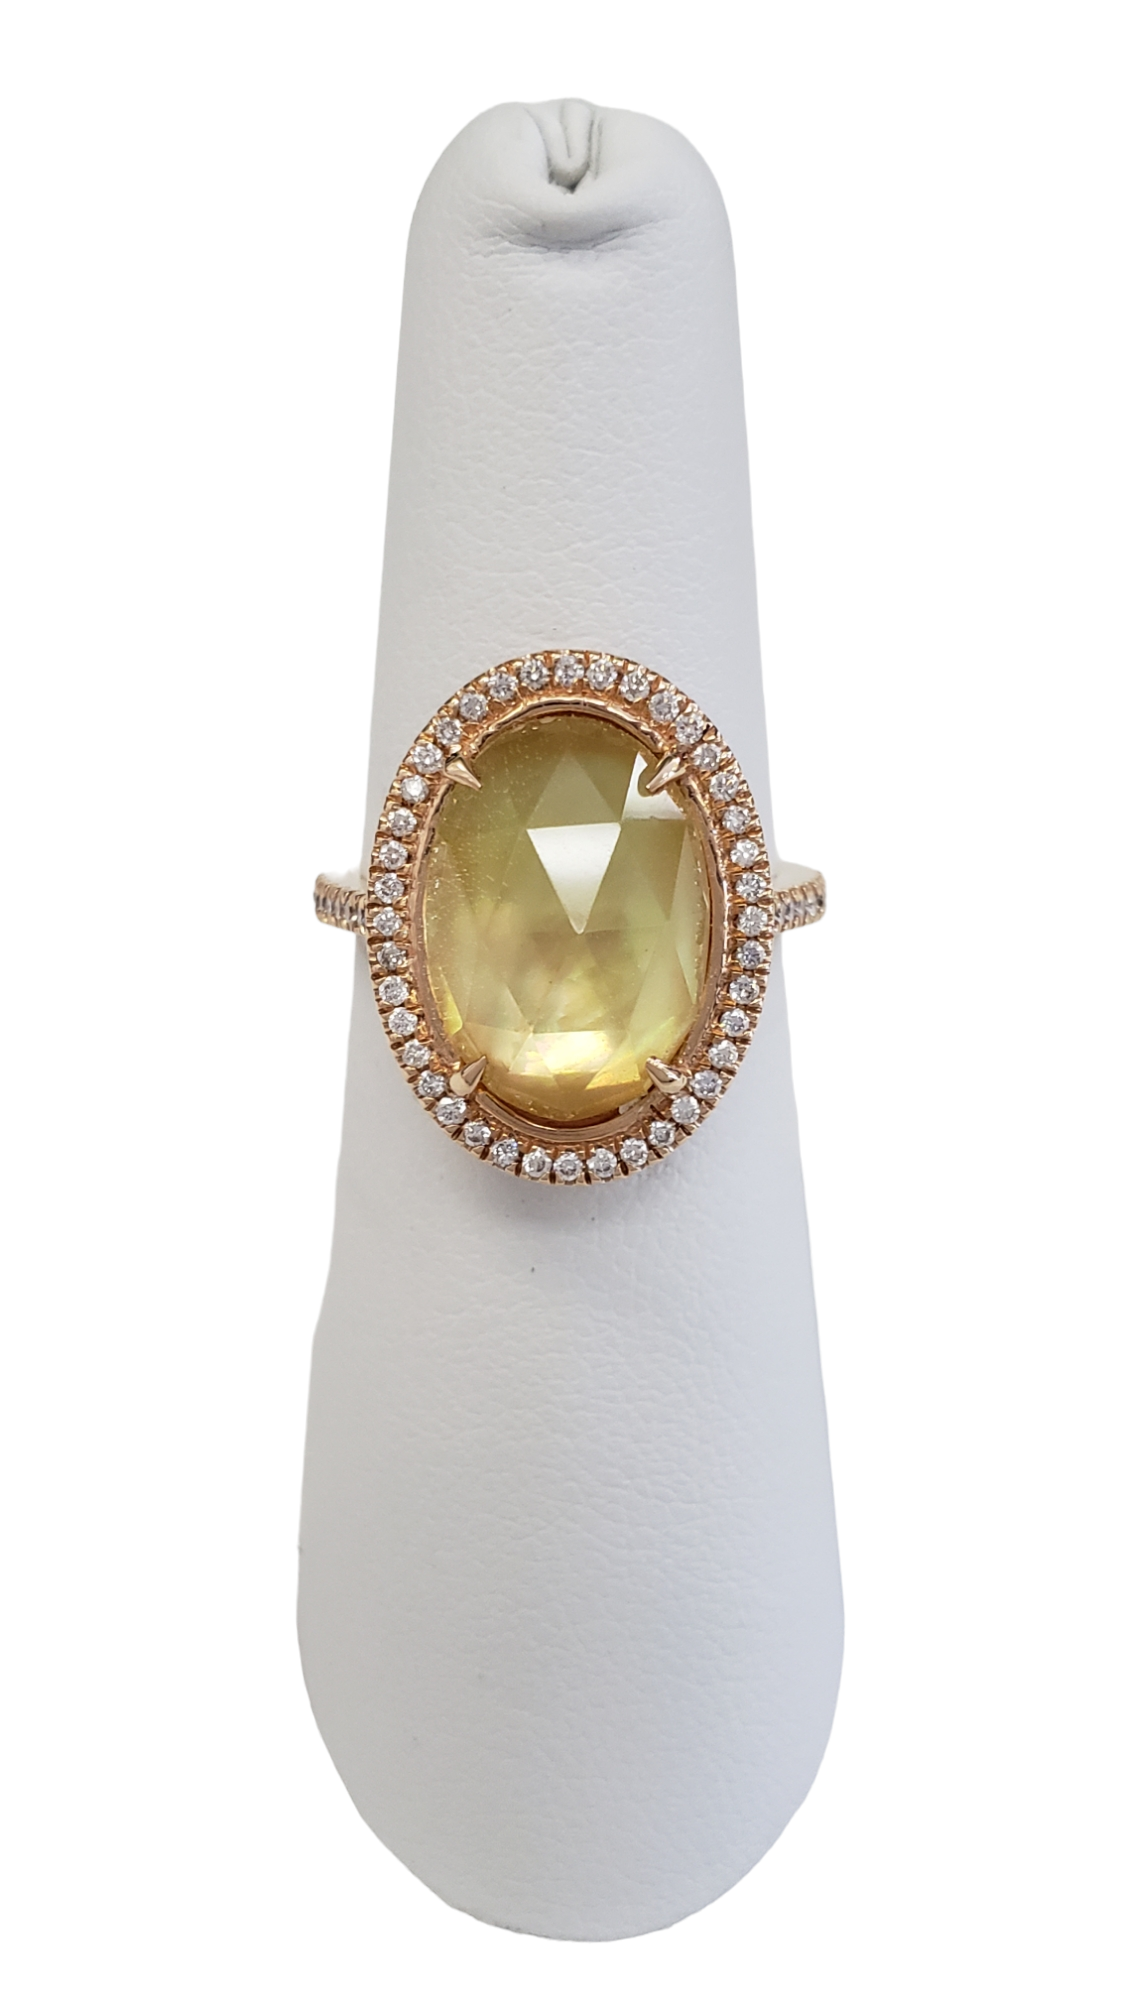 Quartz on Mother of Pearl with Diamonds 18K Rose Gold Women's Ring